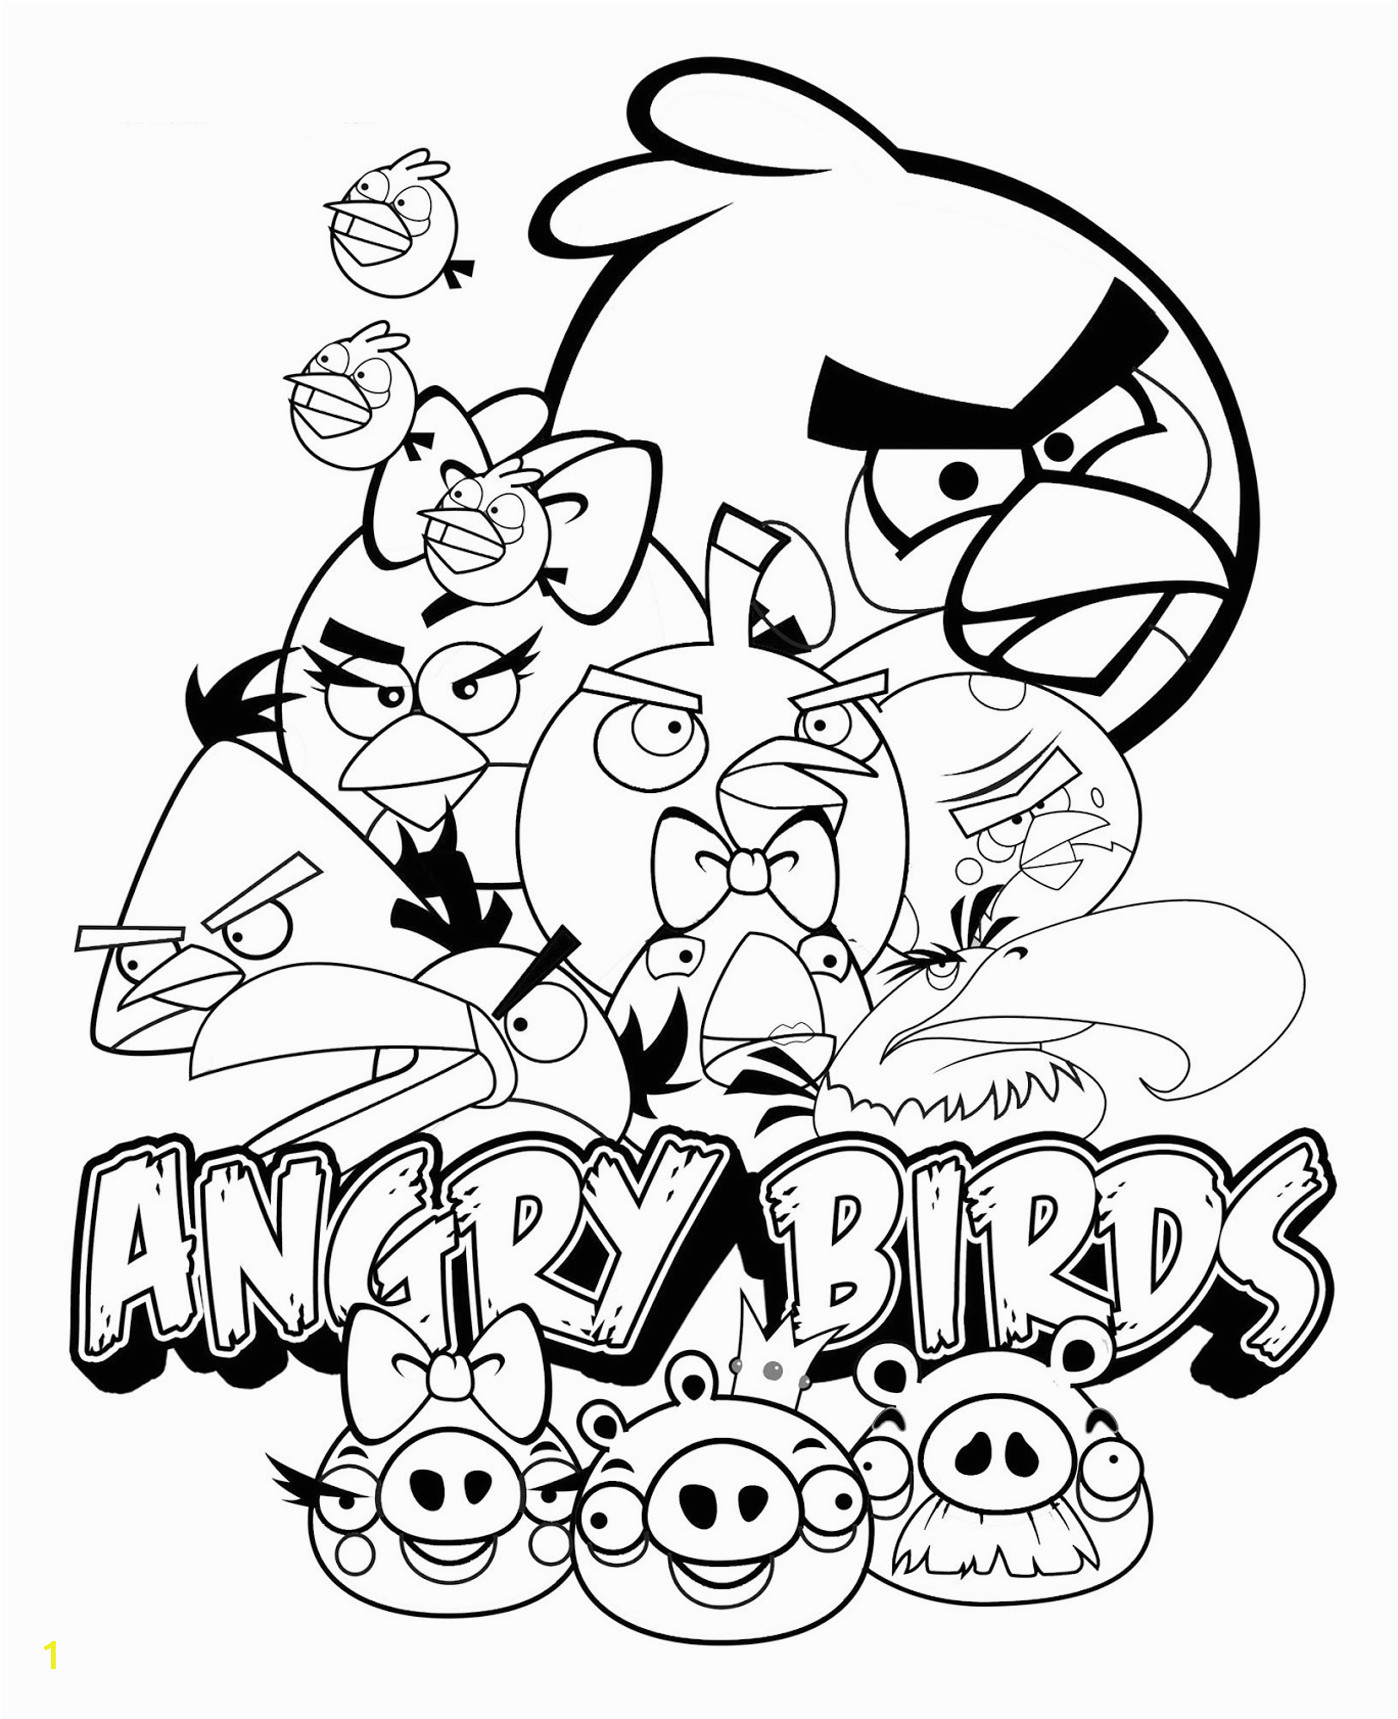 Angry Birds Coloring Pages for Kids Angry Birds to for Free Angry Birds Kids